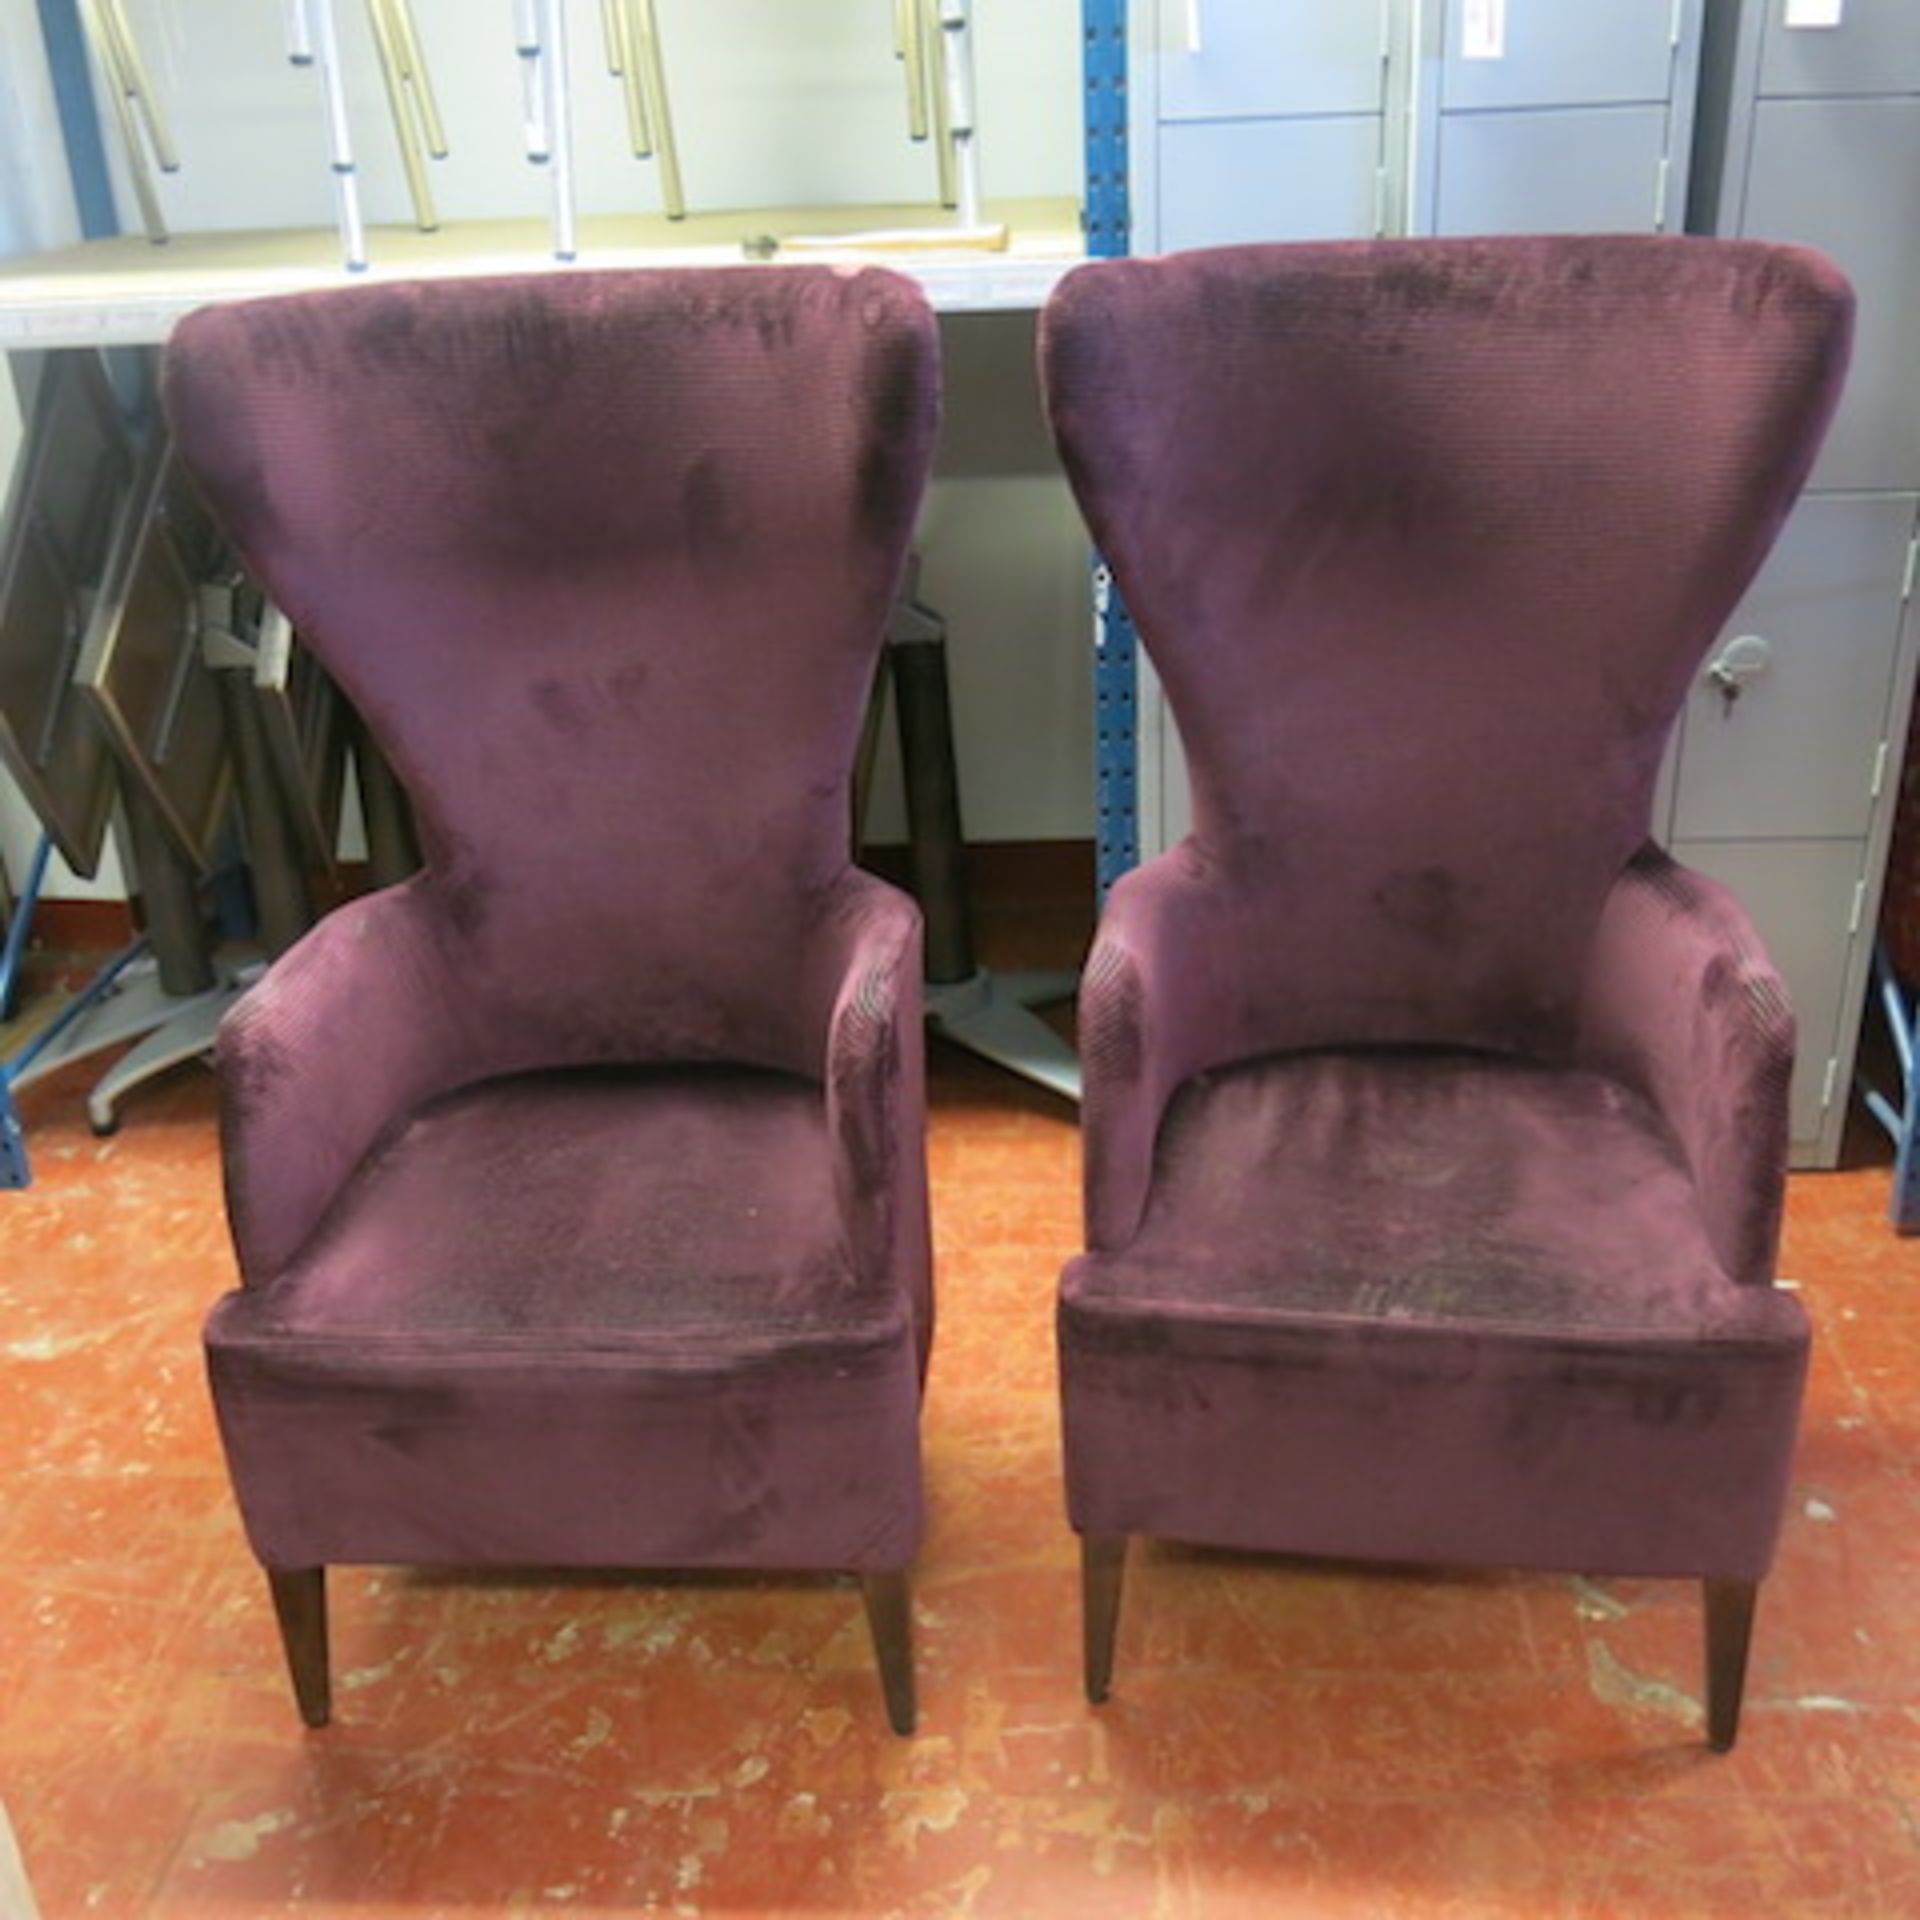 2 x Matching Crushed Velour Armchairs with Assorted Colour Striped Pattern and Plain Seat, Appears